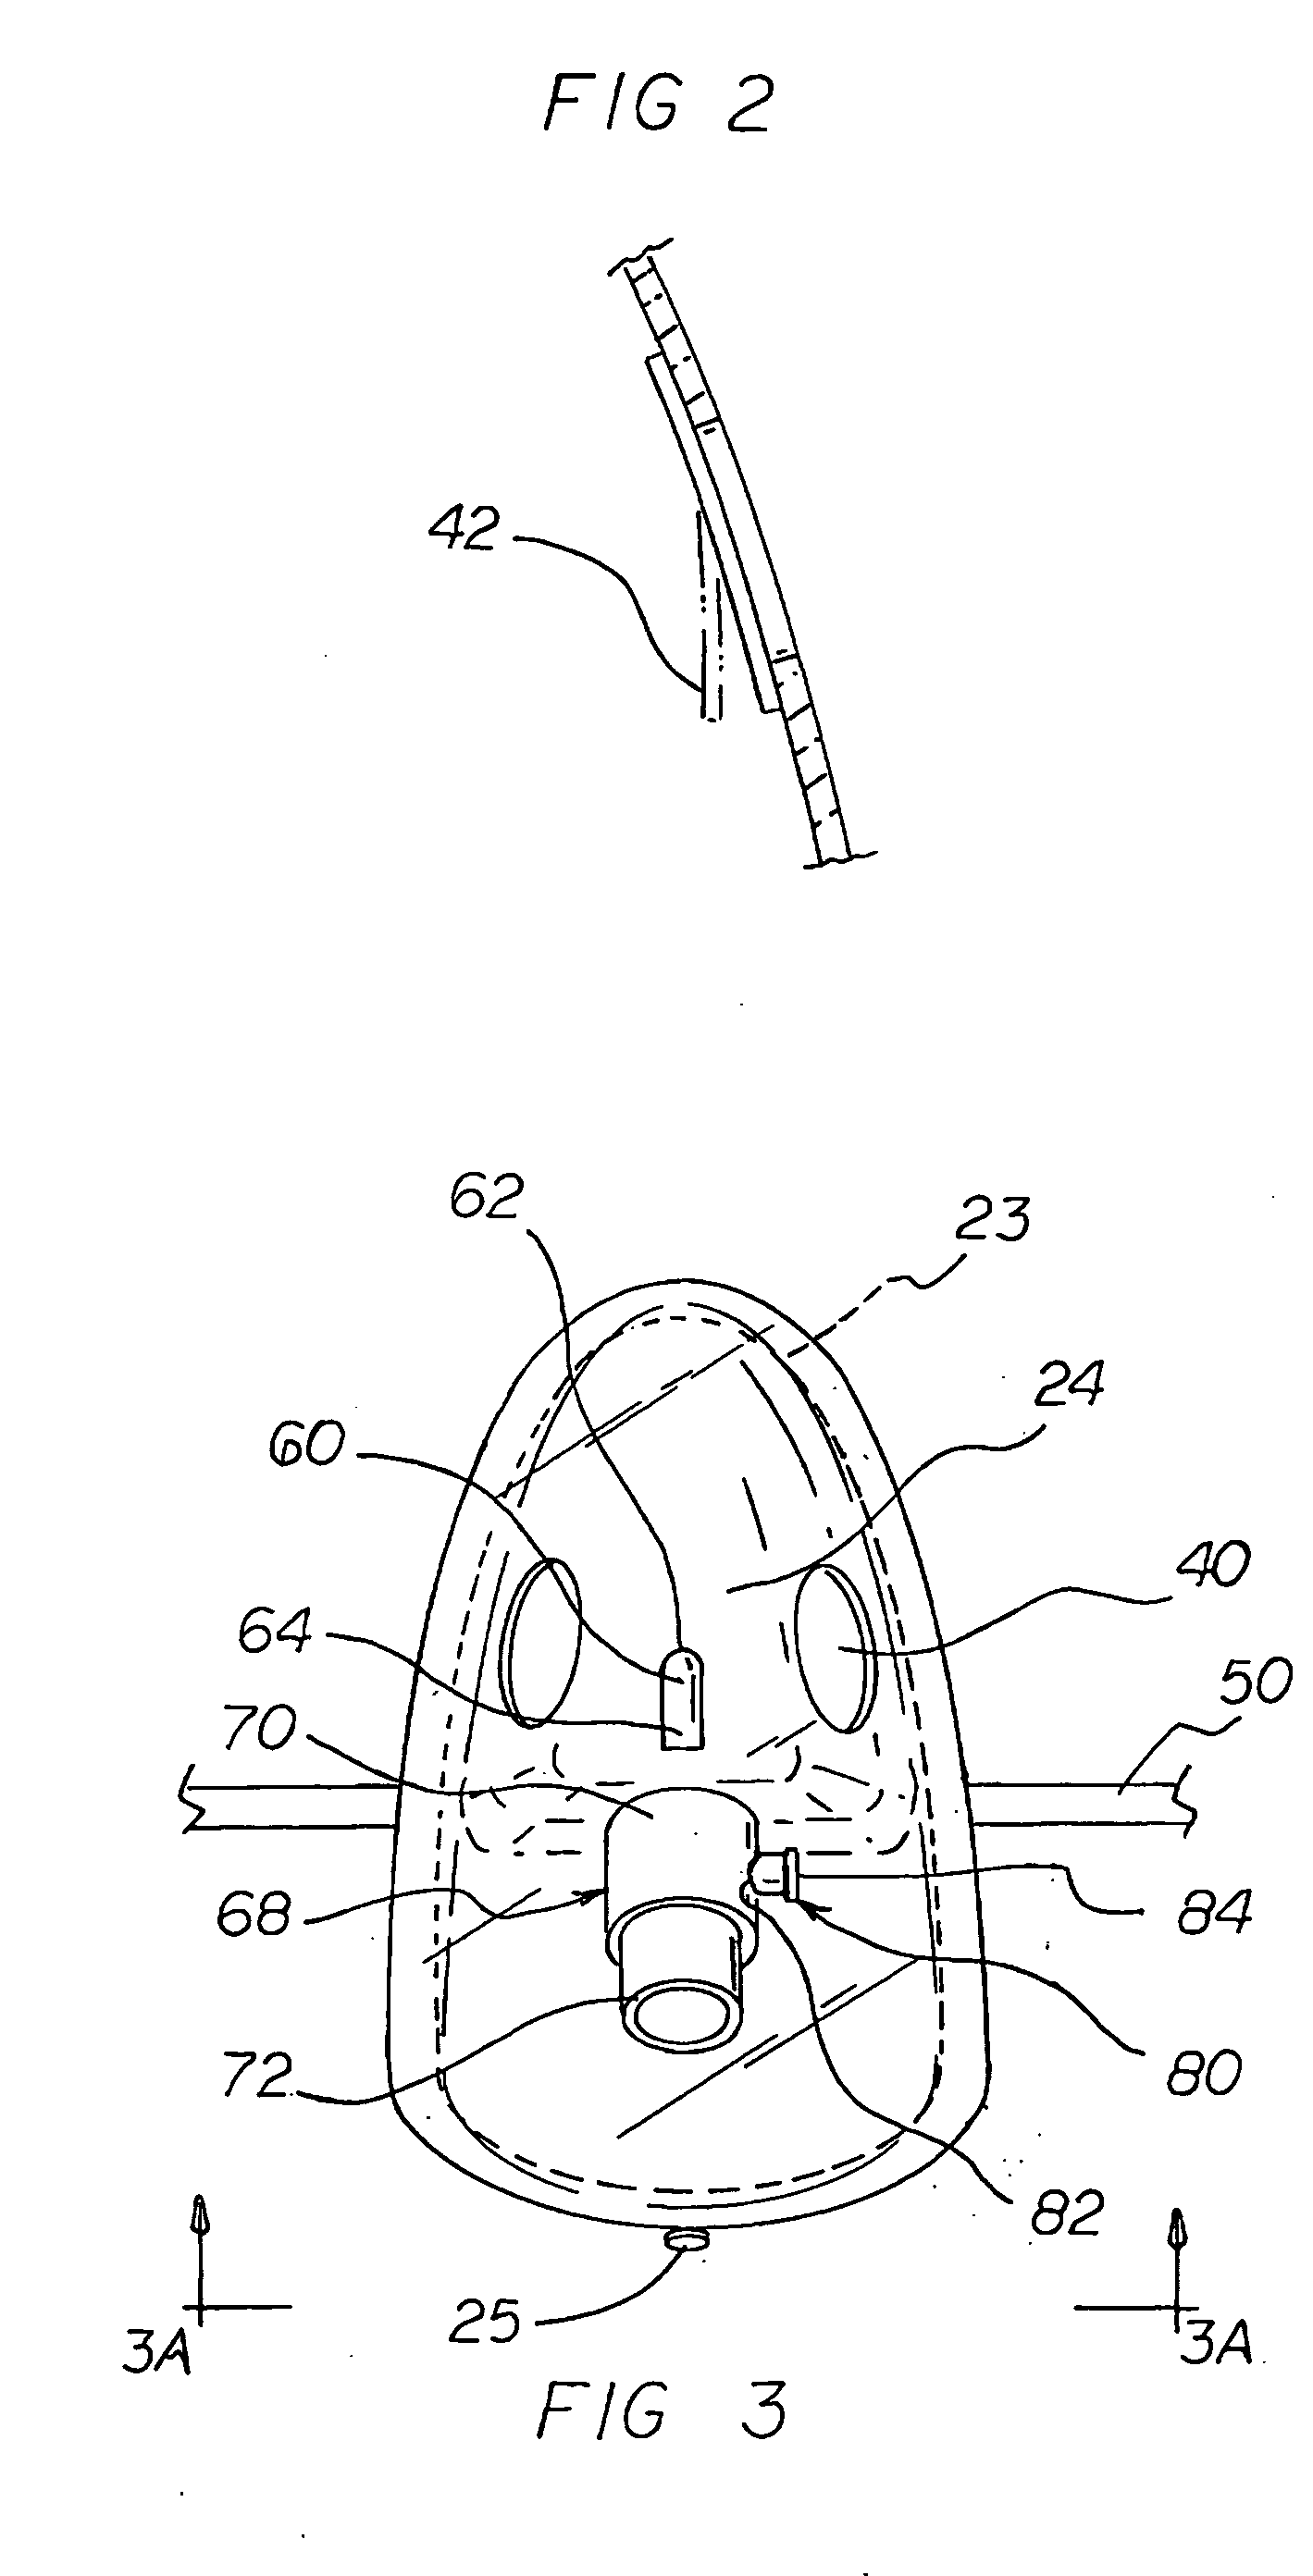 Gas delivery, evacuation and respiratory monitoring system and method